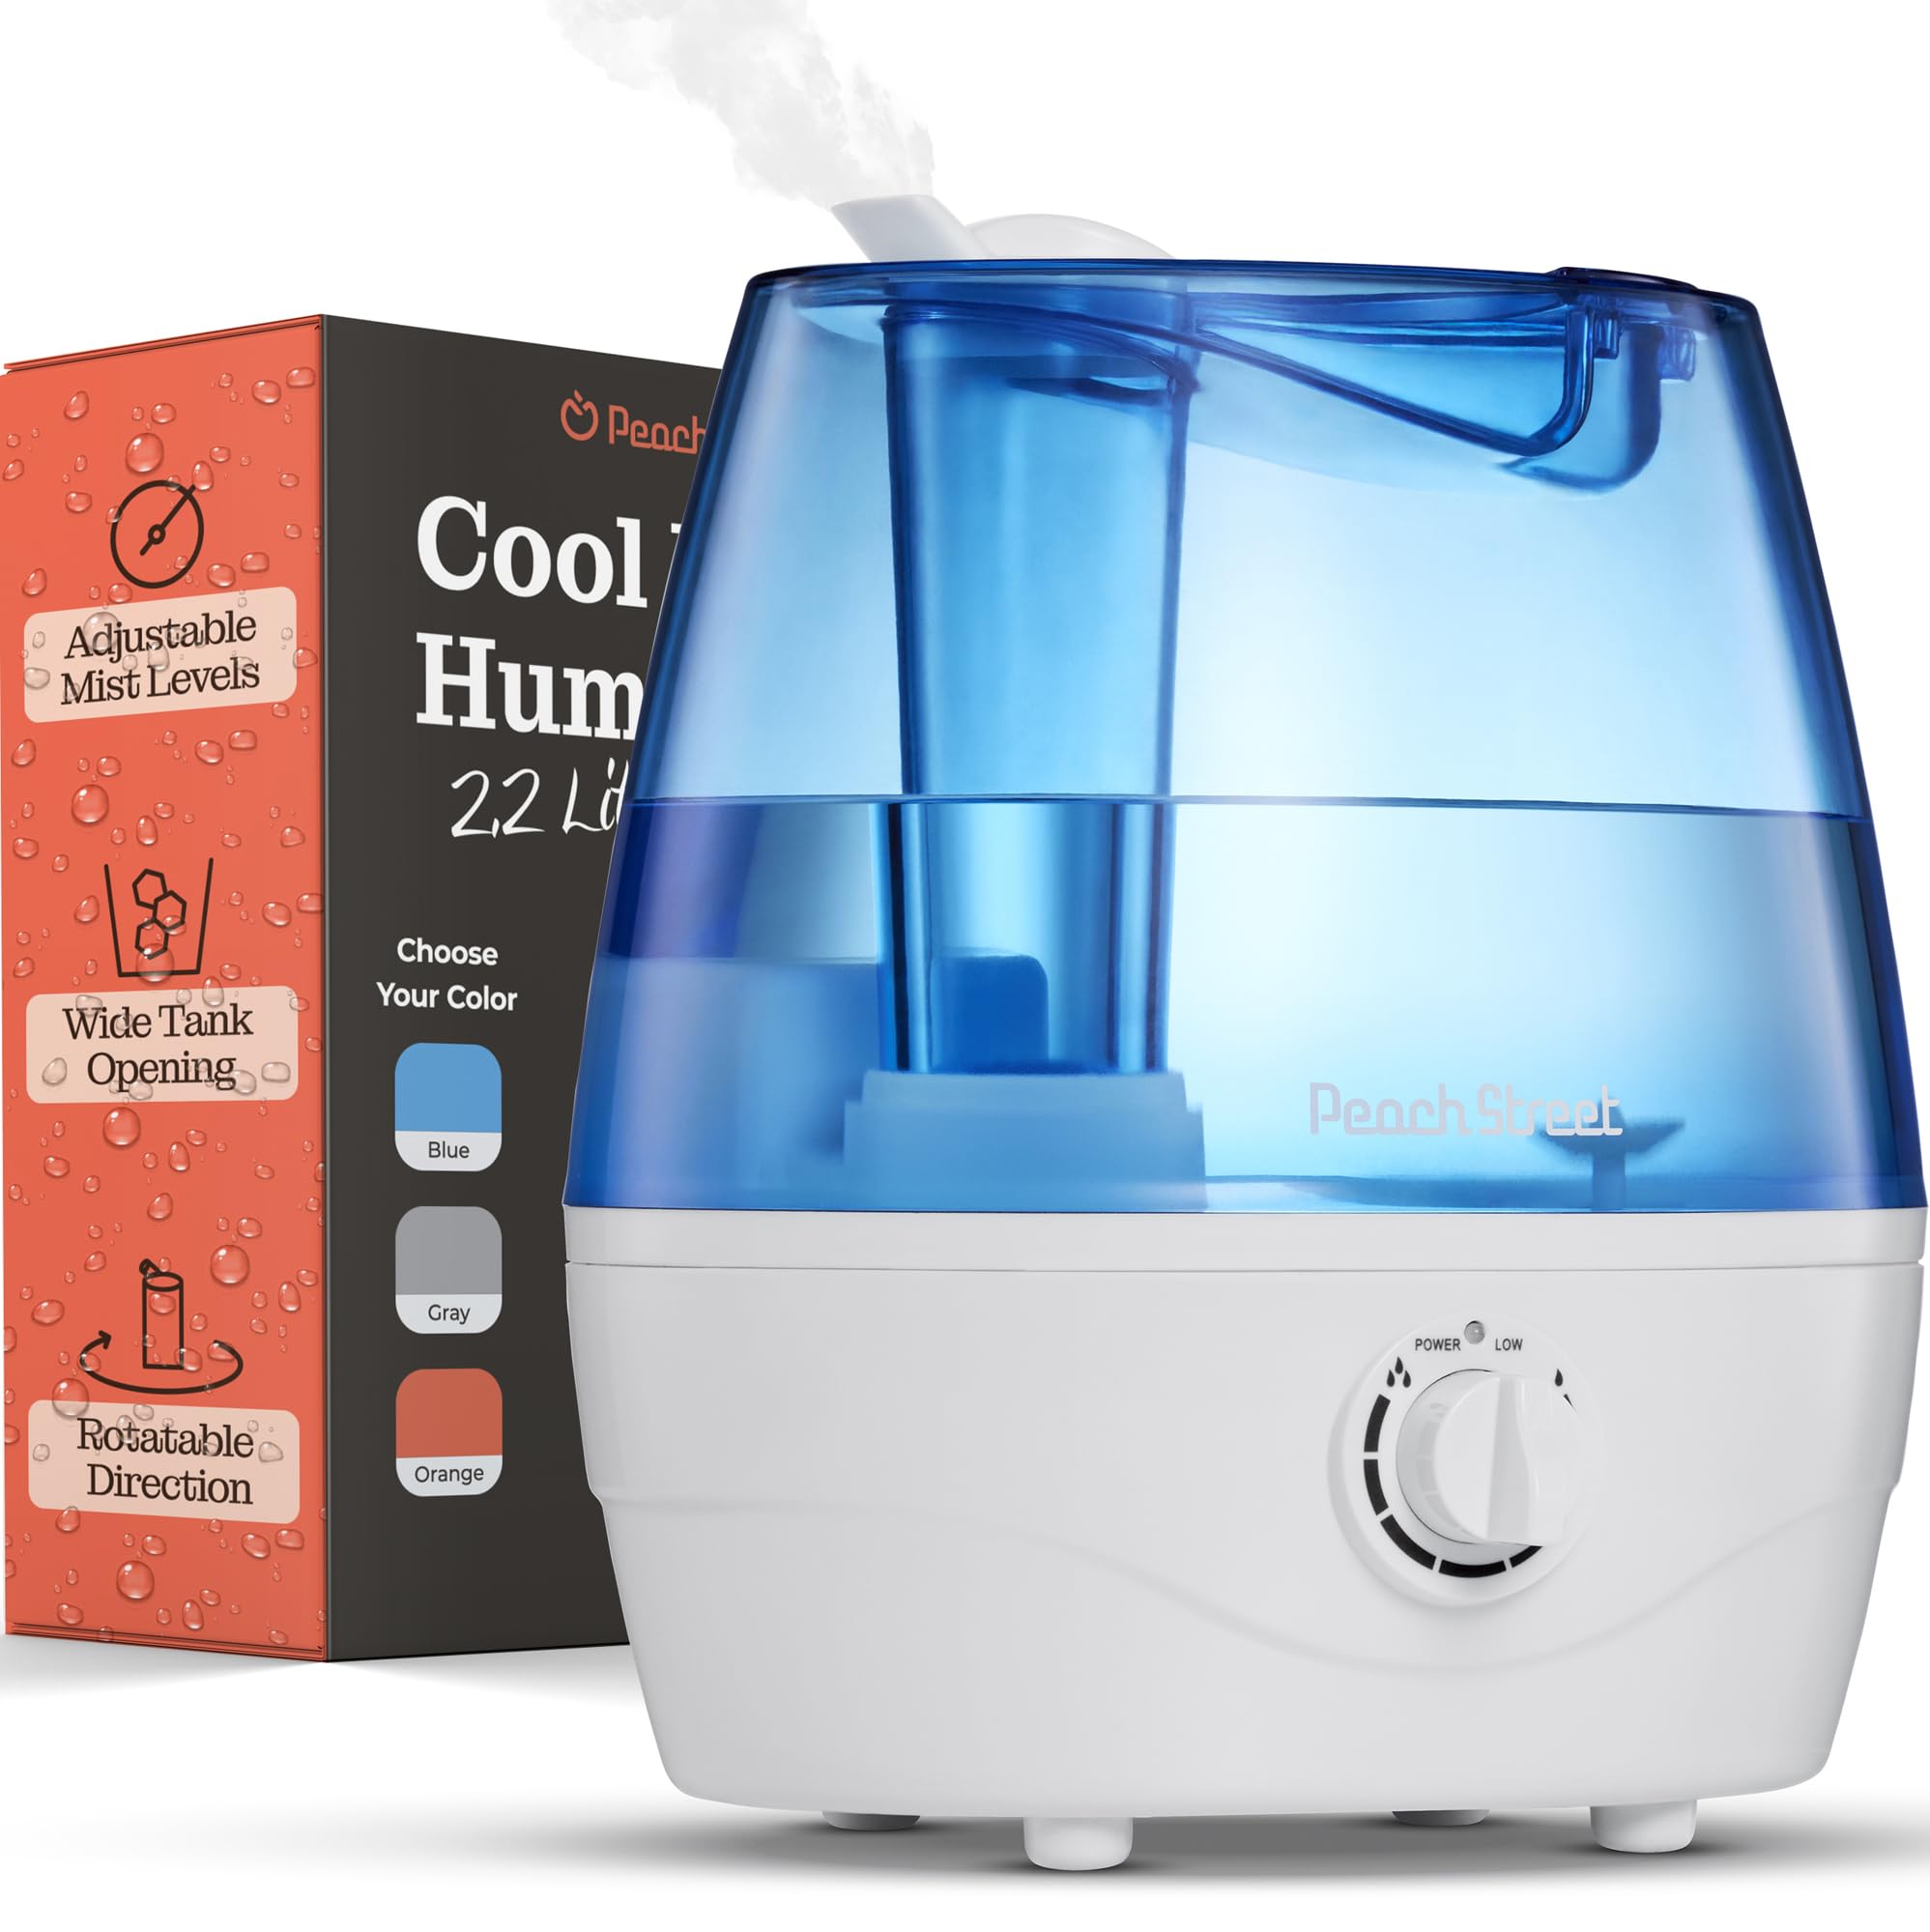 Cool Mist Humidifier - 2.2L Water Tank, for Bedroom, Baby, Quiet Ultrasonic Air Vaporizer, Adjustable Mist Level, 360 Nozzle Rotation, Auto-Shut Off, Large Area Humidifiers Easy Fill and Clean  - Very Good